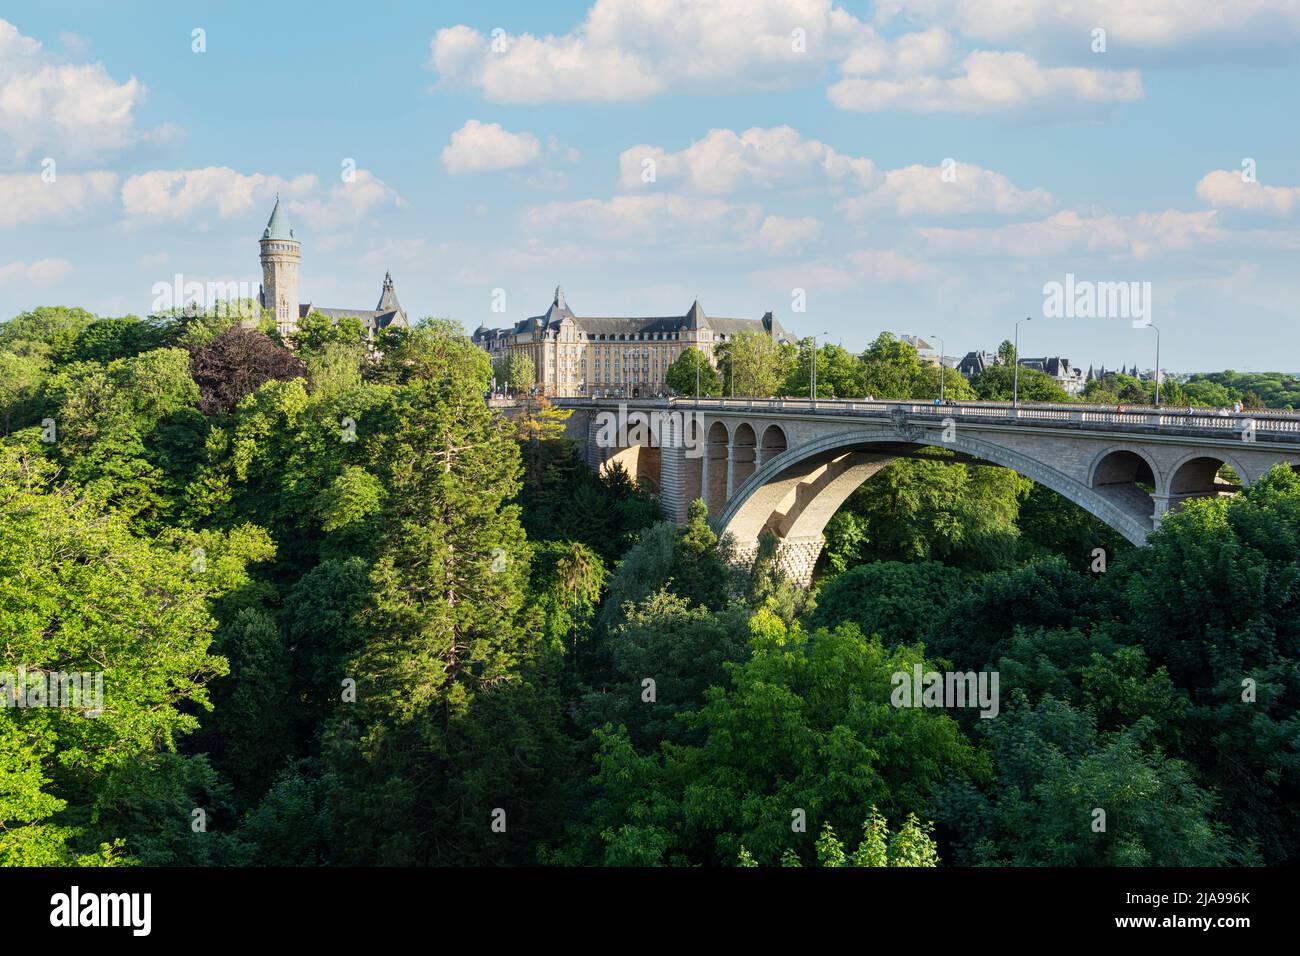 Luxembourg city, May 2022.  Adolphe Bridge. Stone bridge from the early 1900s with a picturesque view from above and a peaceful park at its foot. Stock Photo